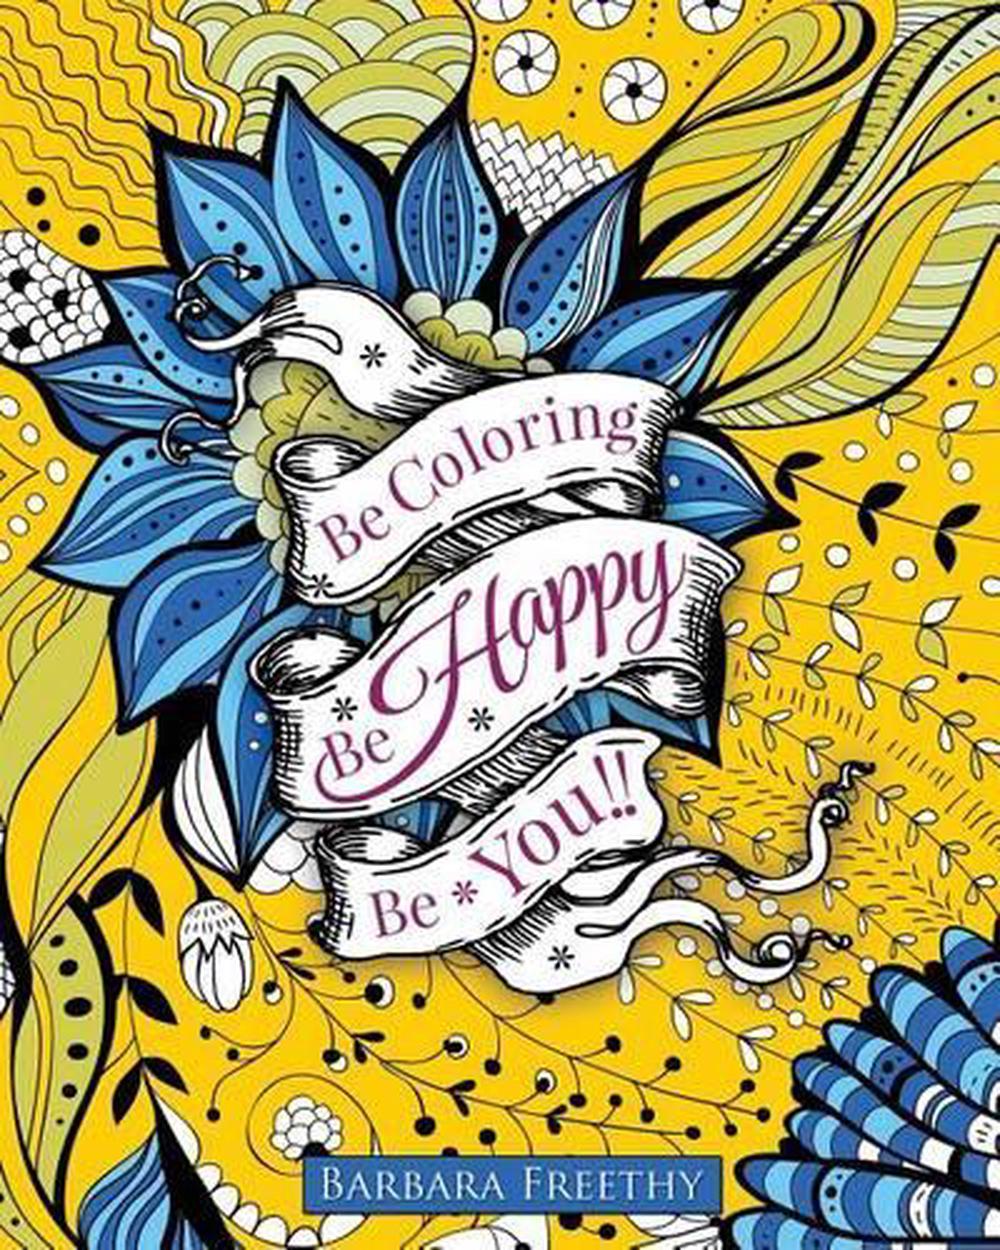 Be Happy: Adult Coloring Book by Barbara Freethy (English) Paperback